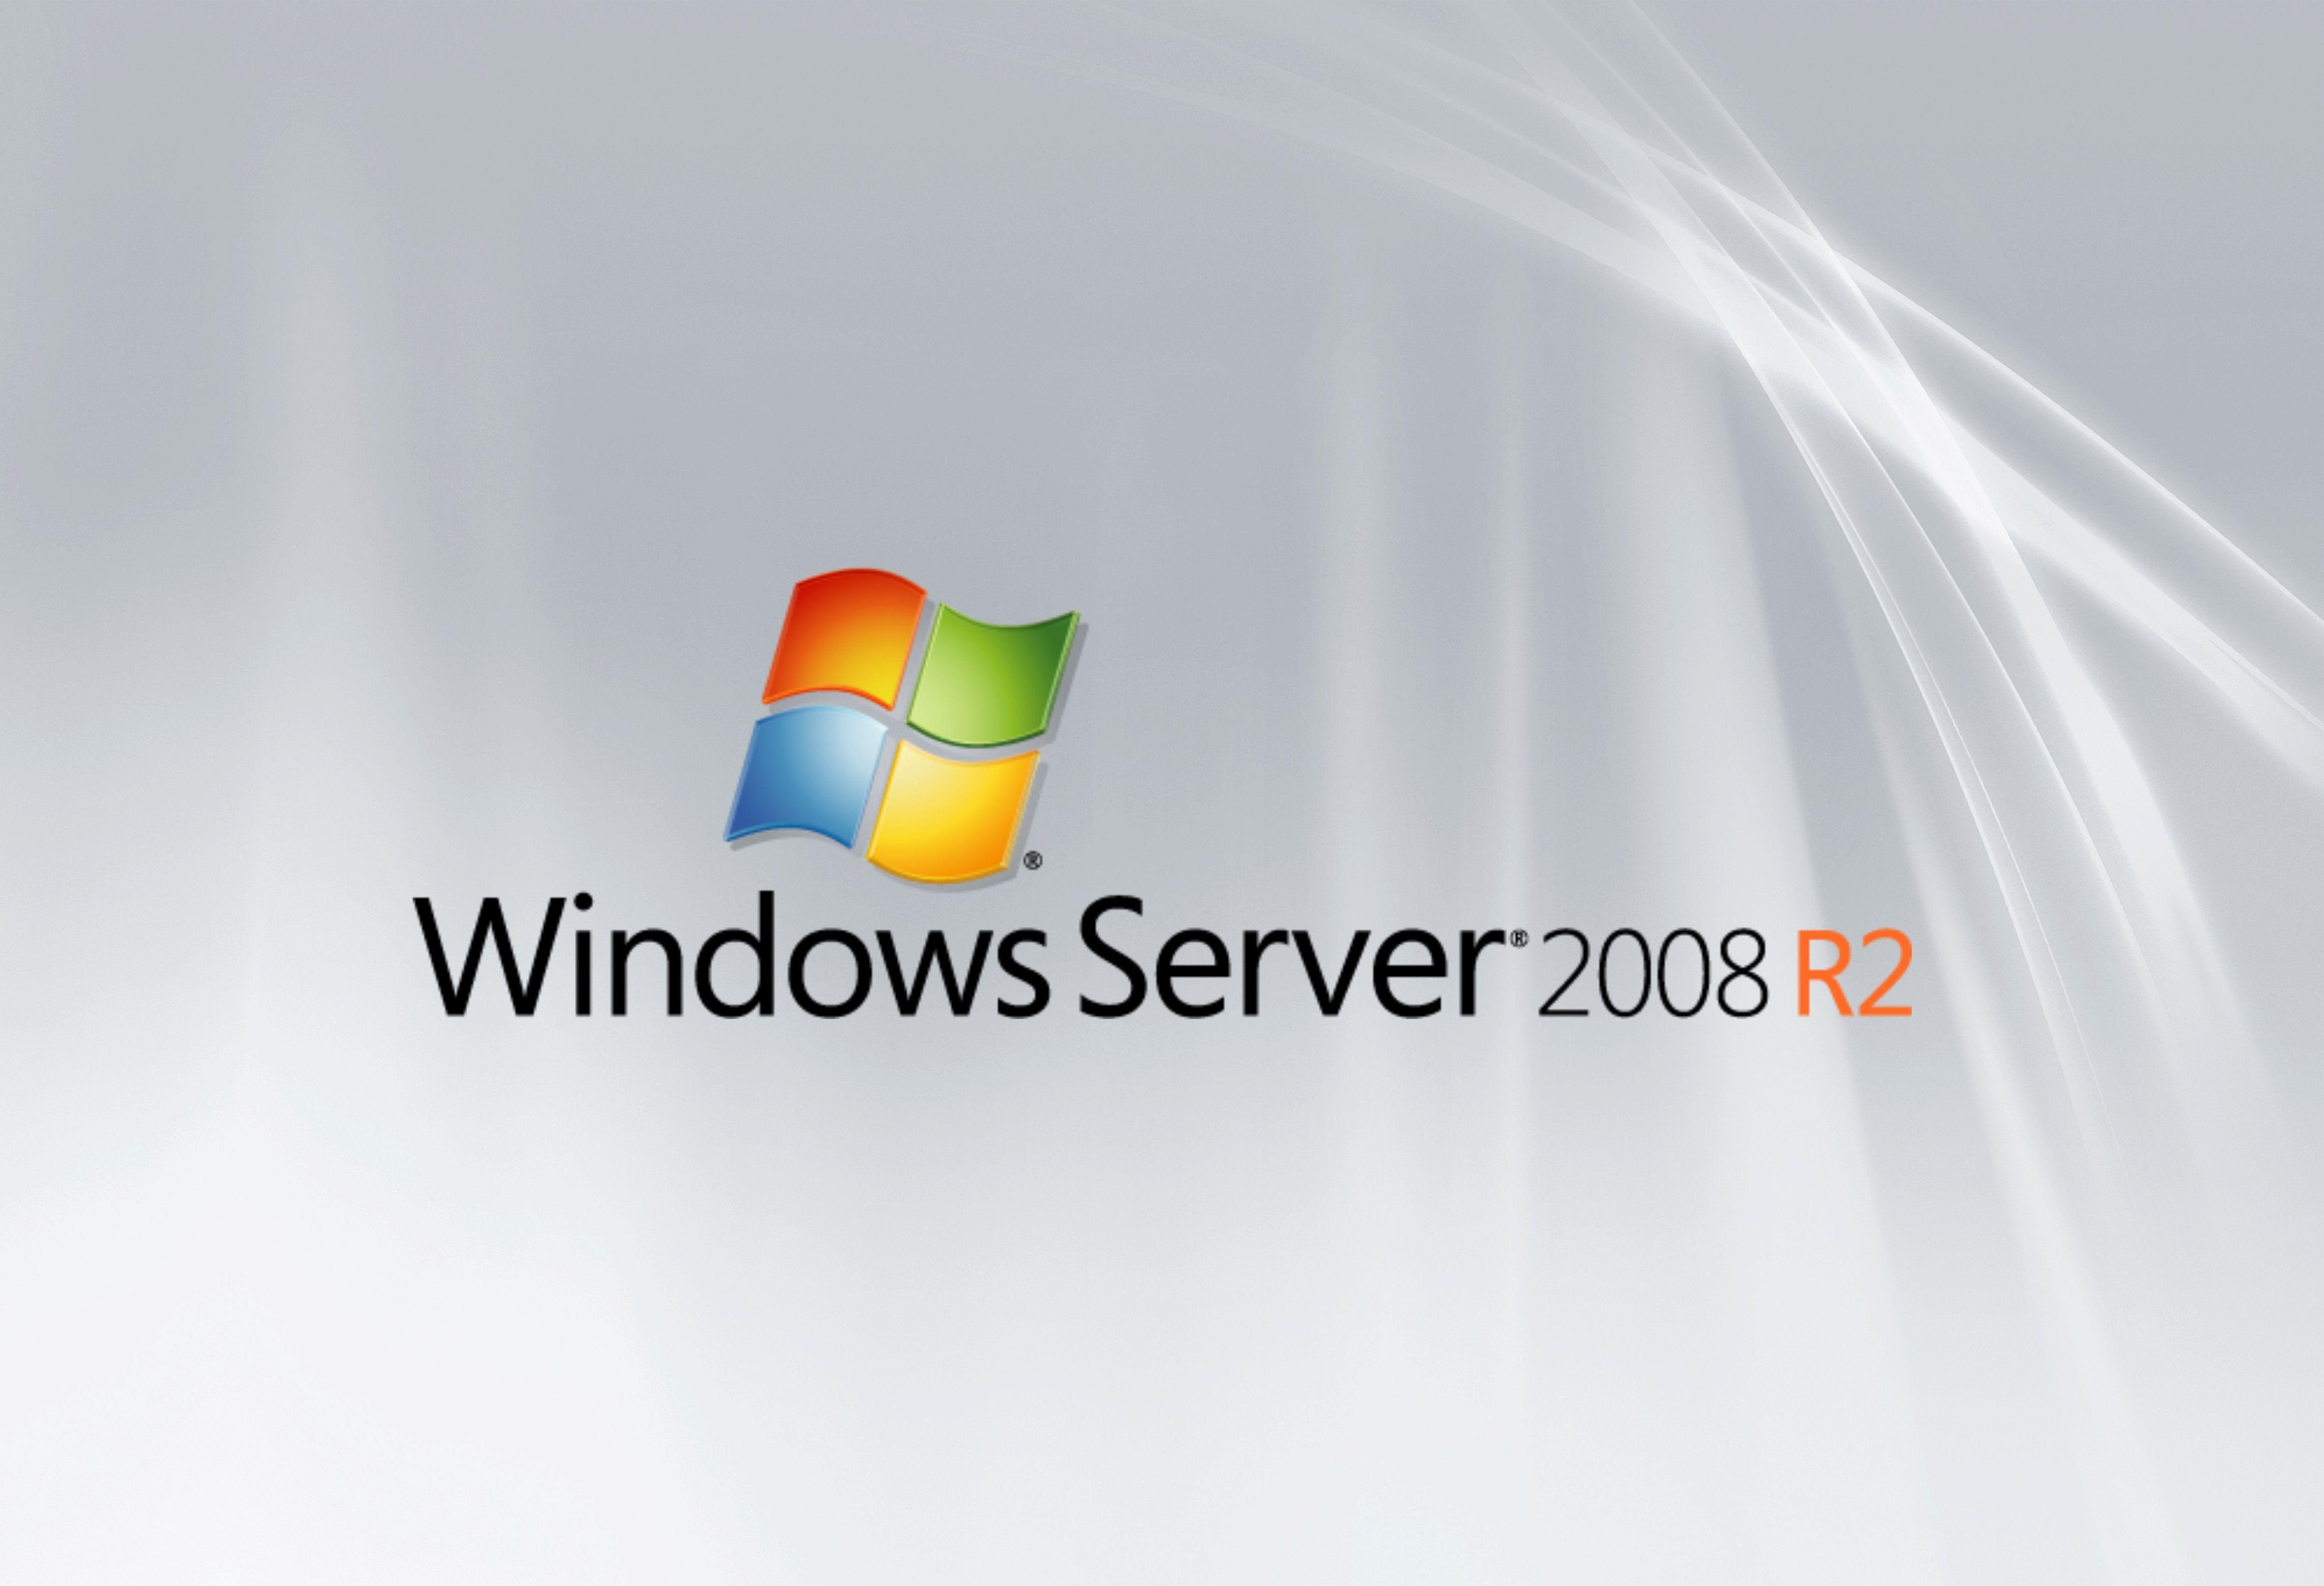 High Quality Windows Server Wallpaper. Full HD Picture